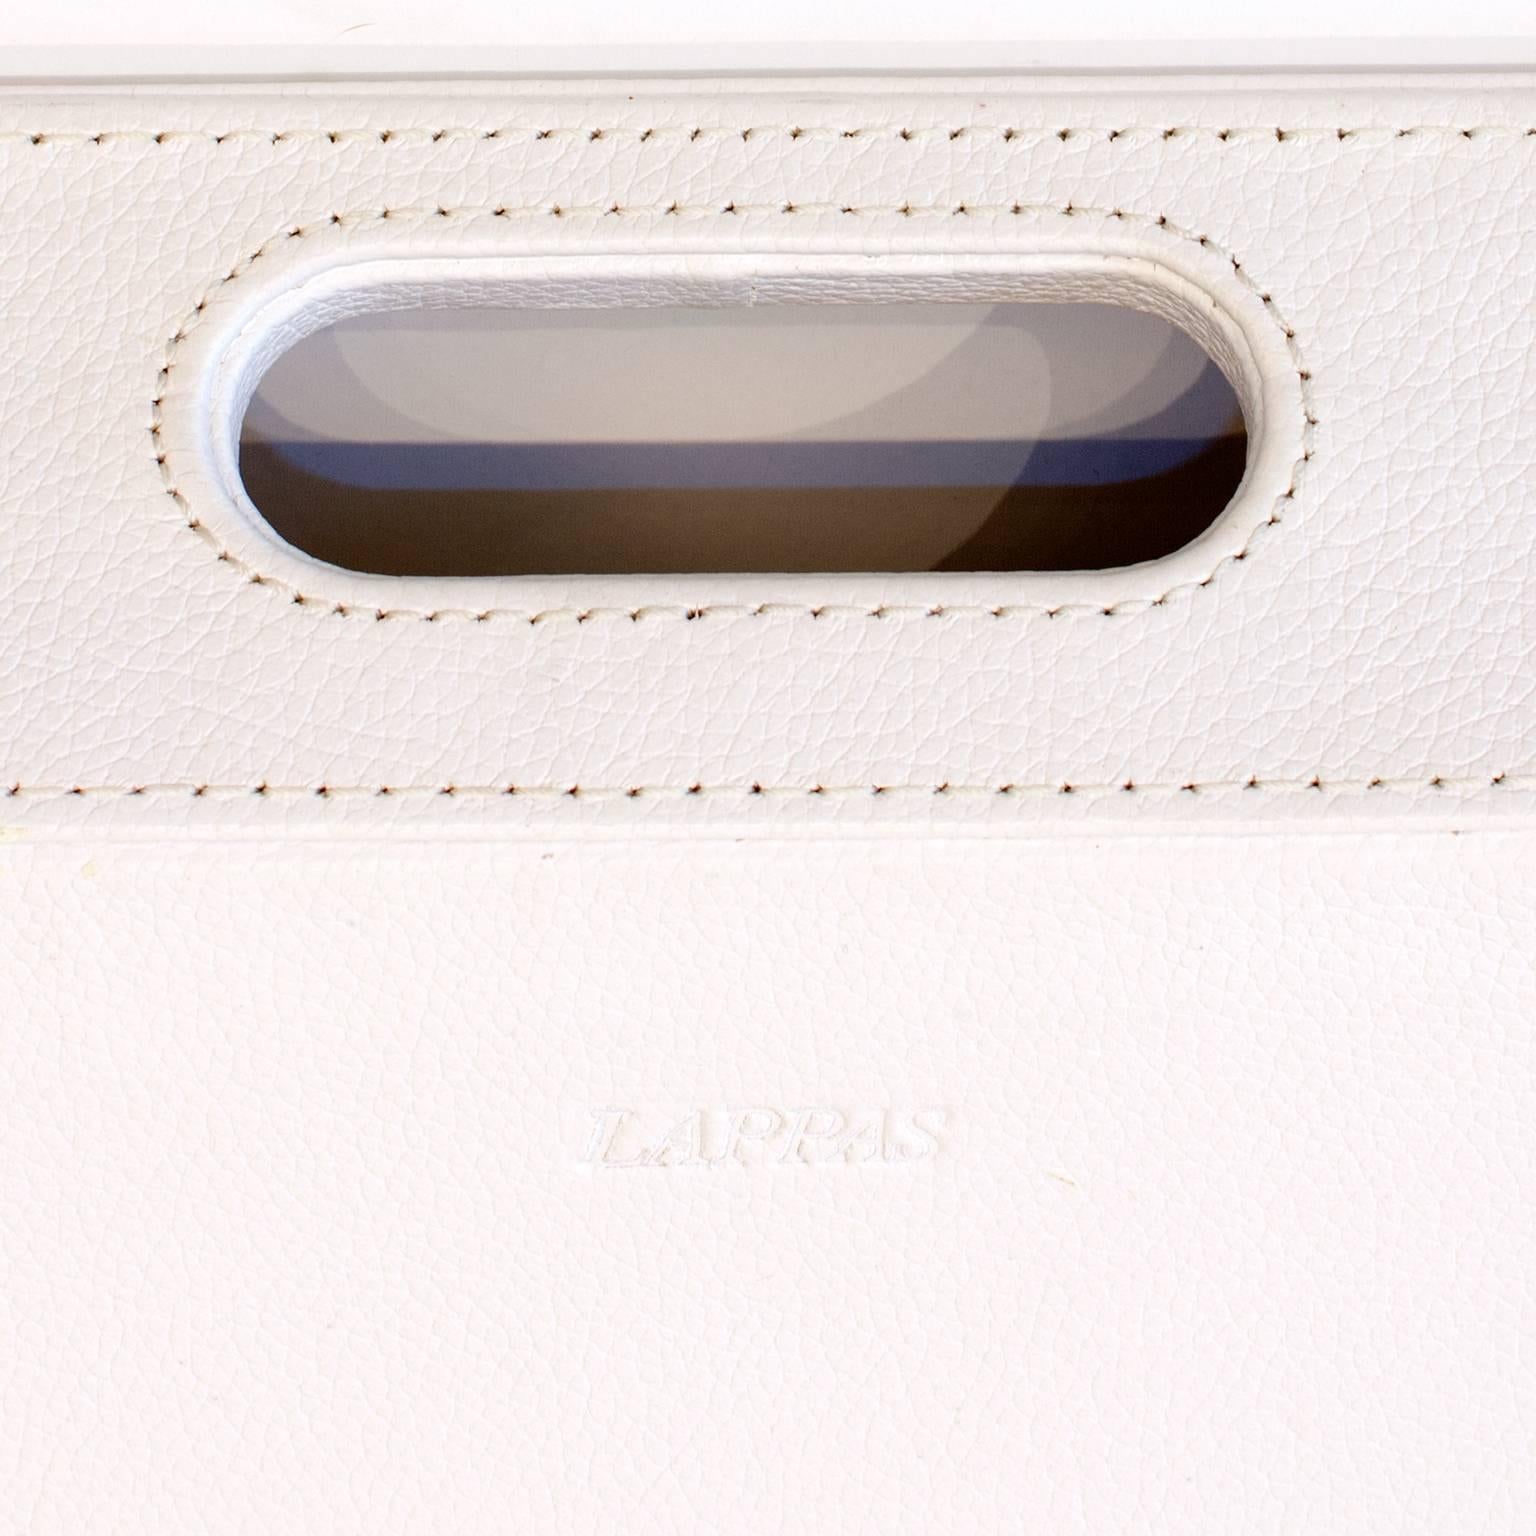 Exceptional Hand-Stitched White Leather Tray For Sale 1